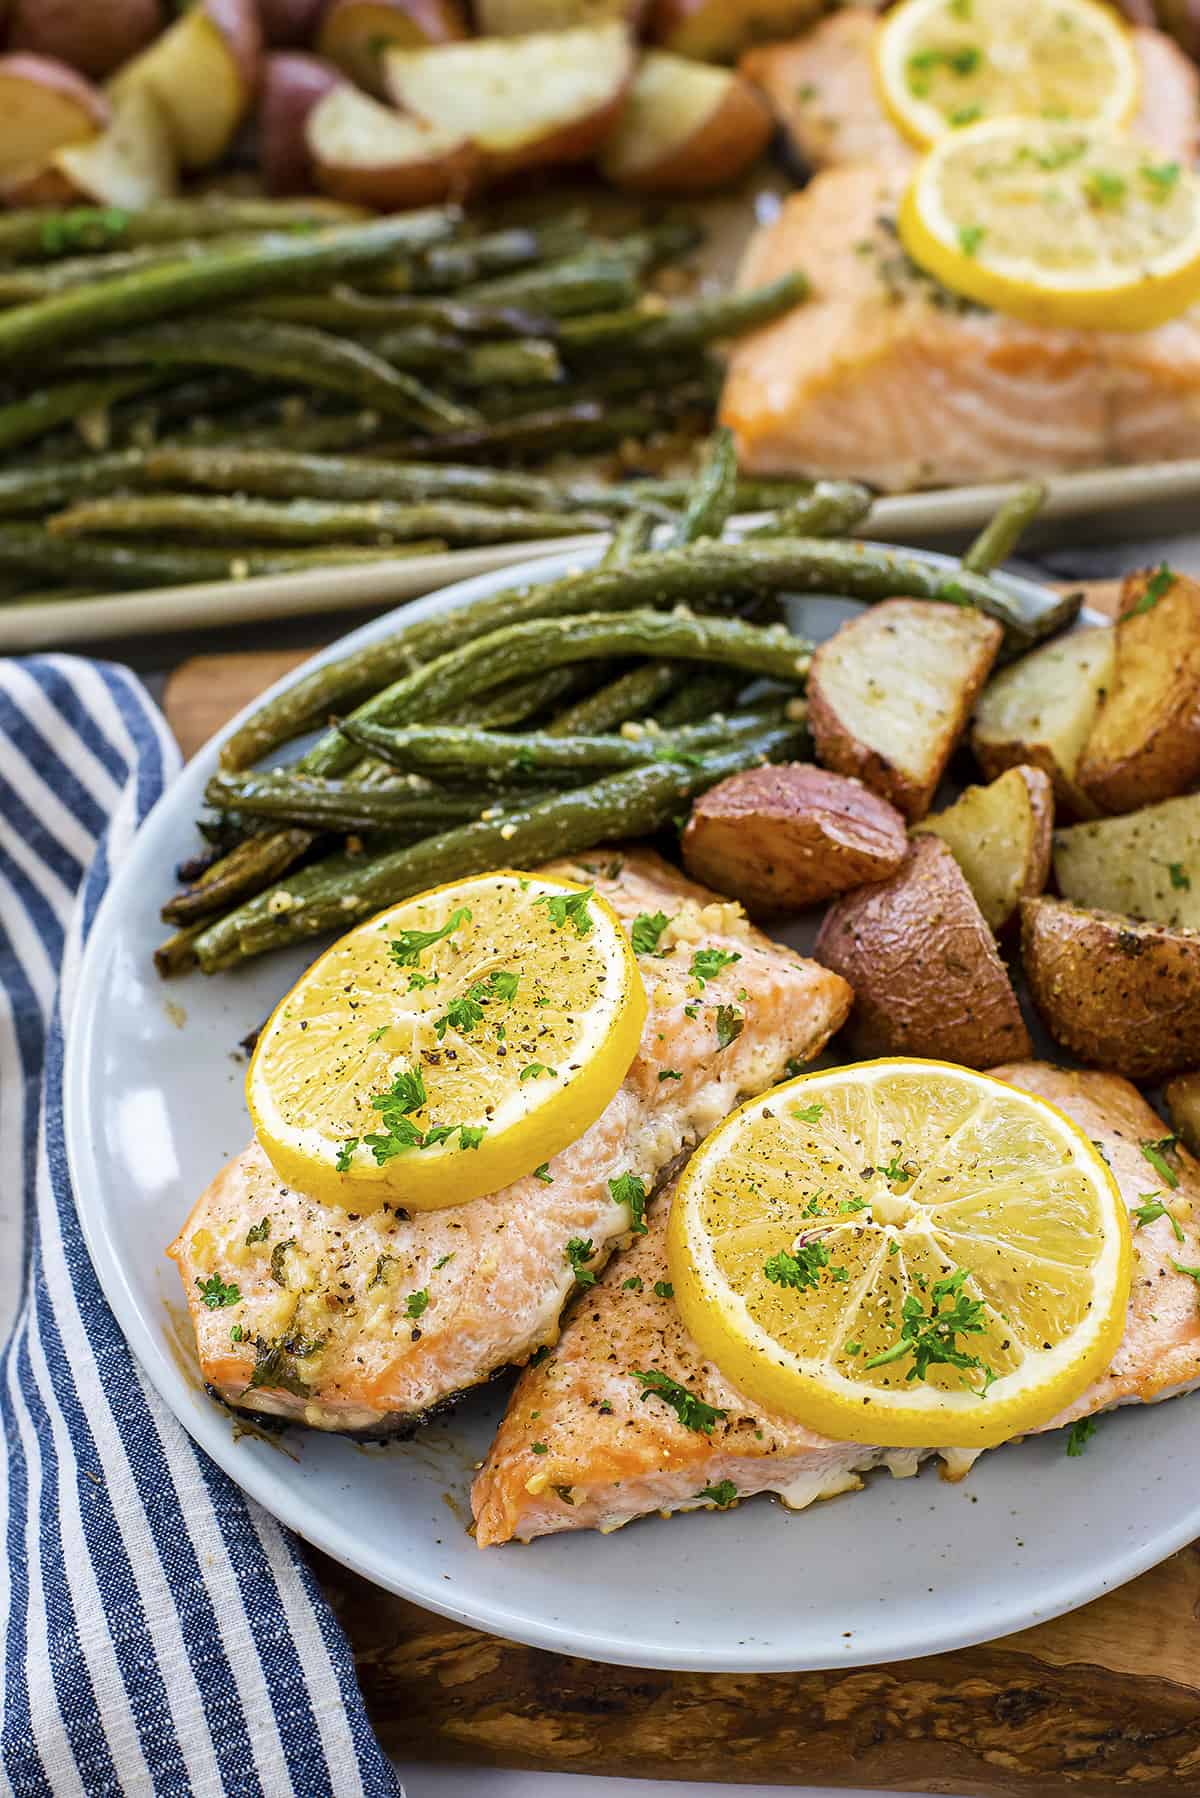 Roasted salmon, green beans, and potatoes on plate.